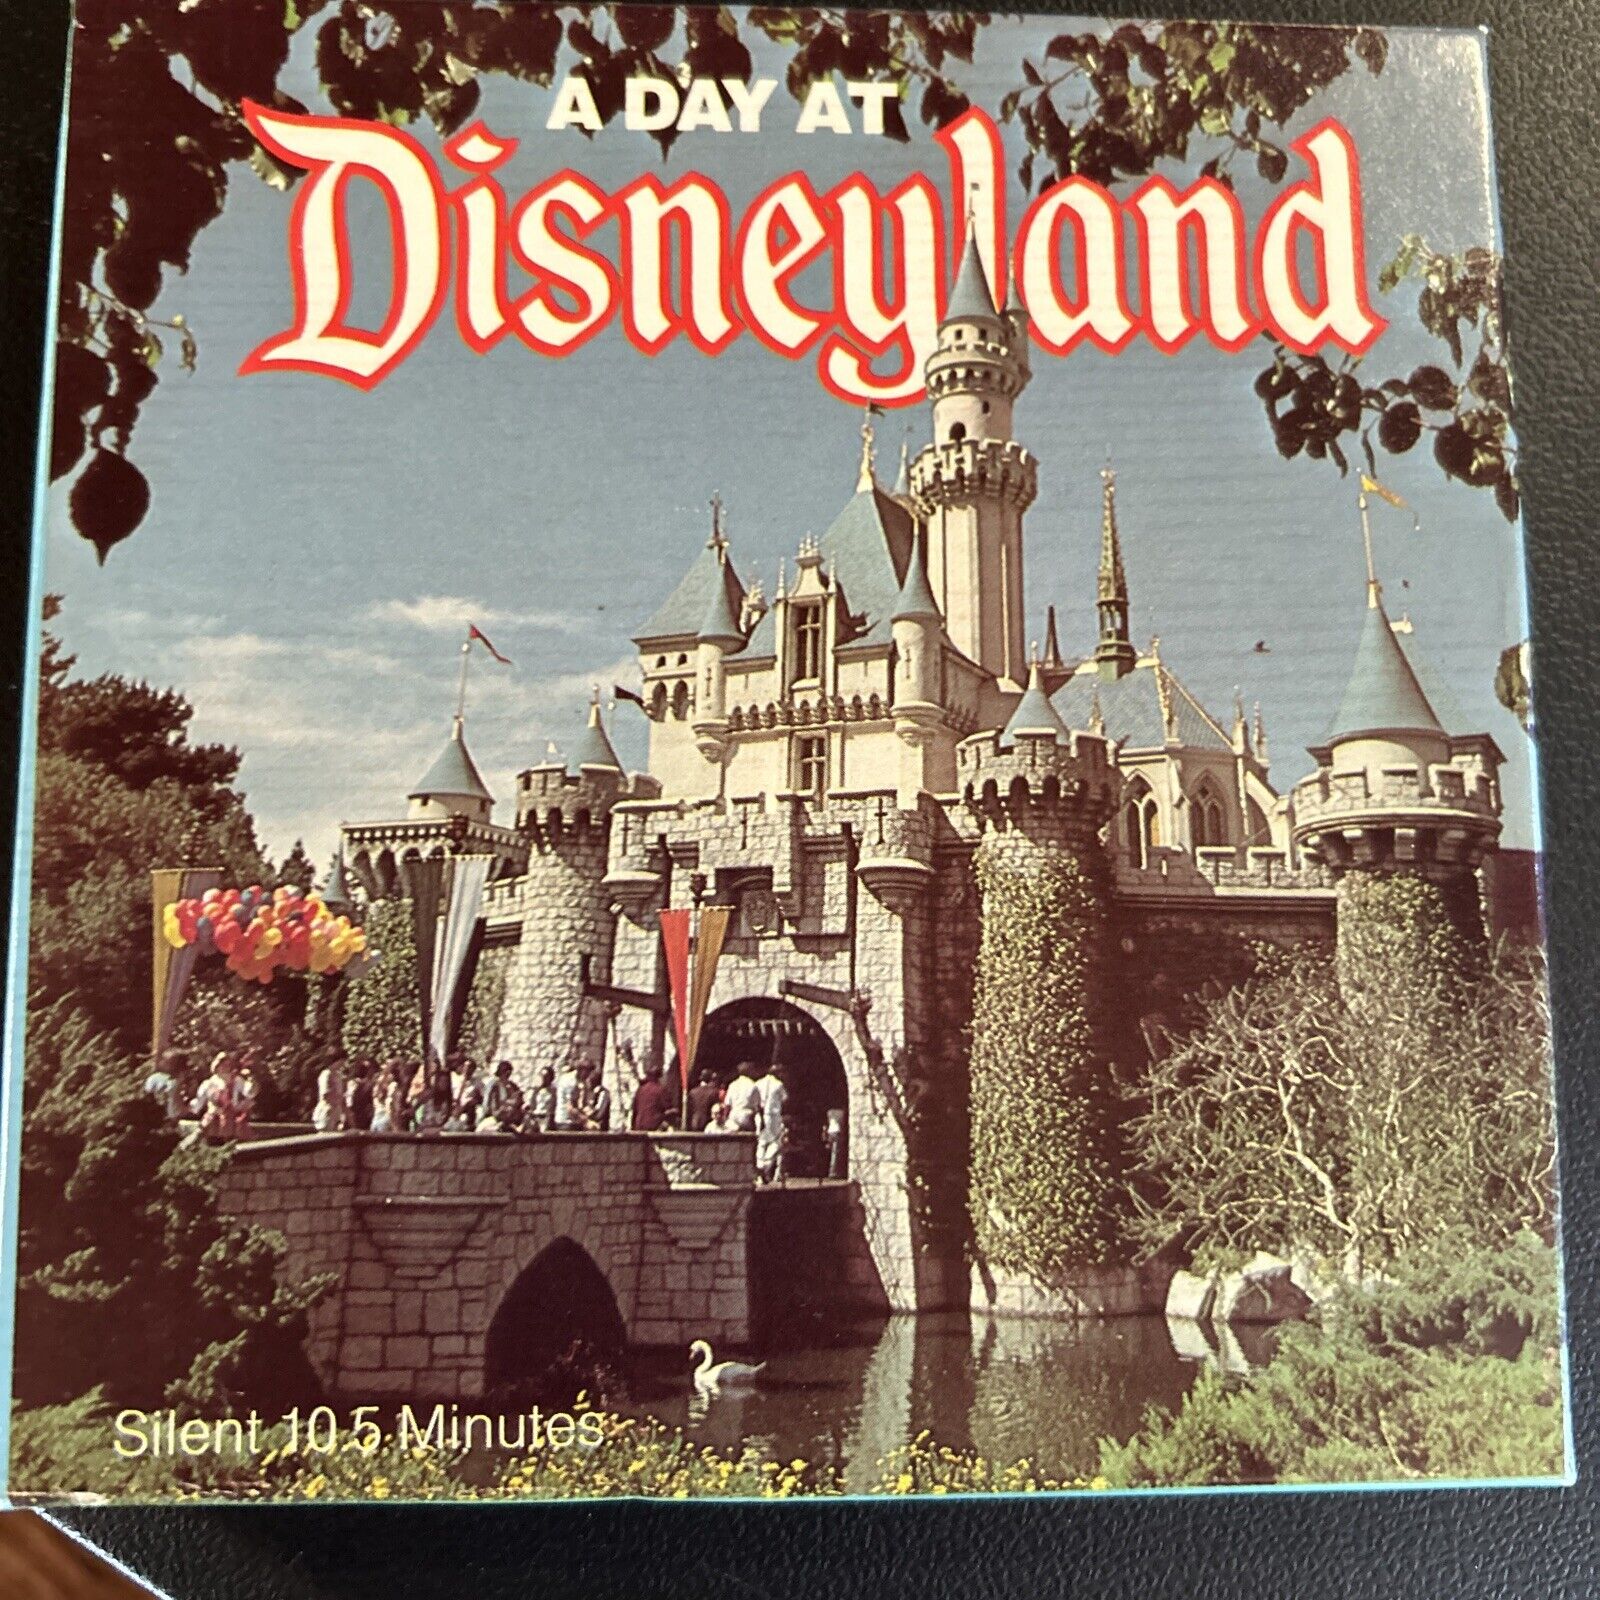 VTG 70s A Day At Disneyland 8mm Silent Film - Early Copy W/ Box